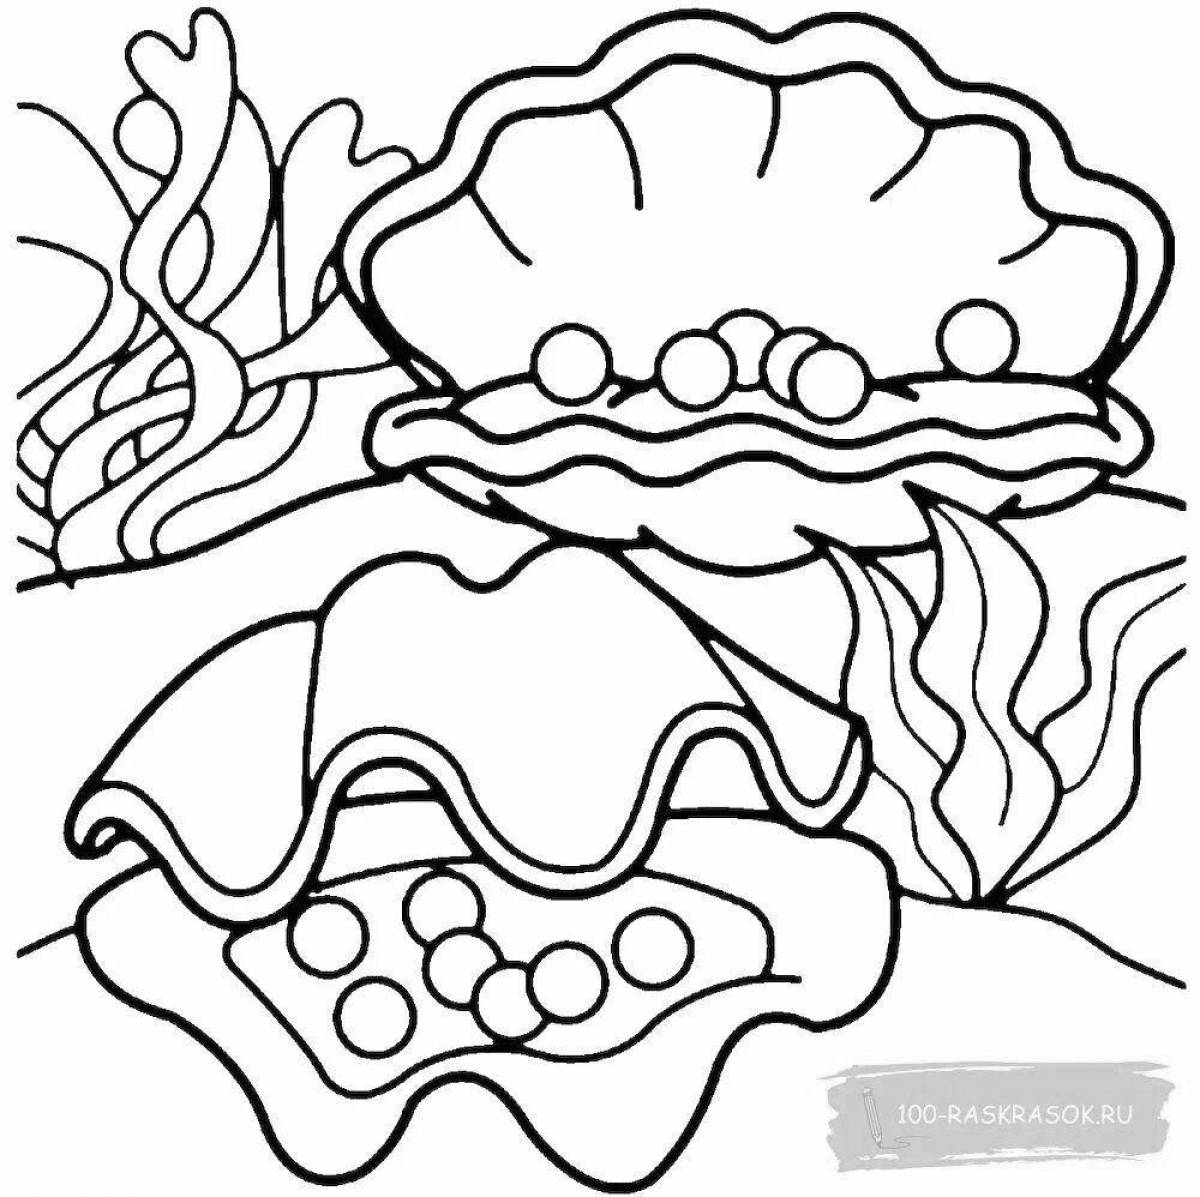 Colorful gem coloring page for kids